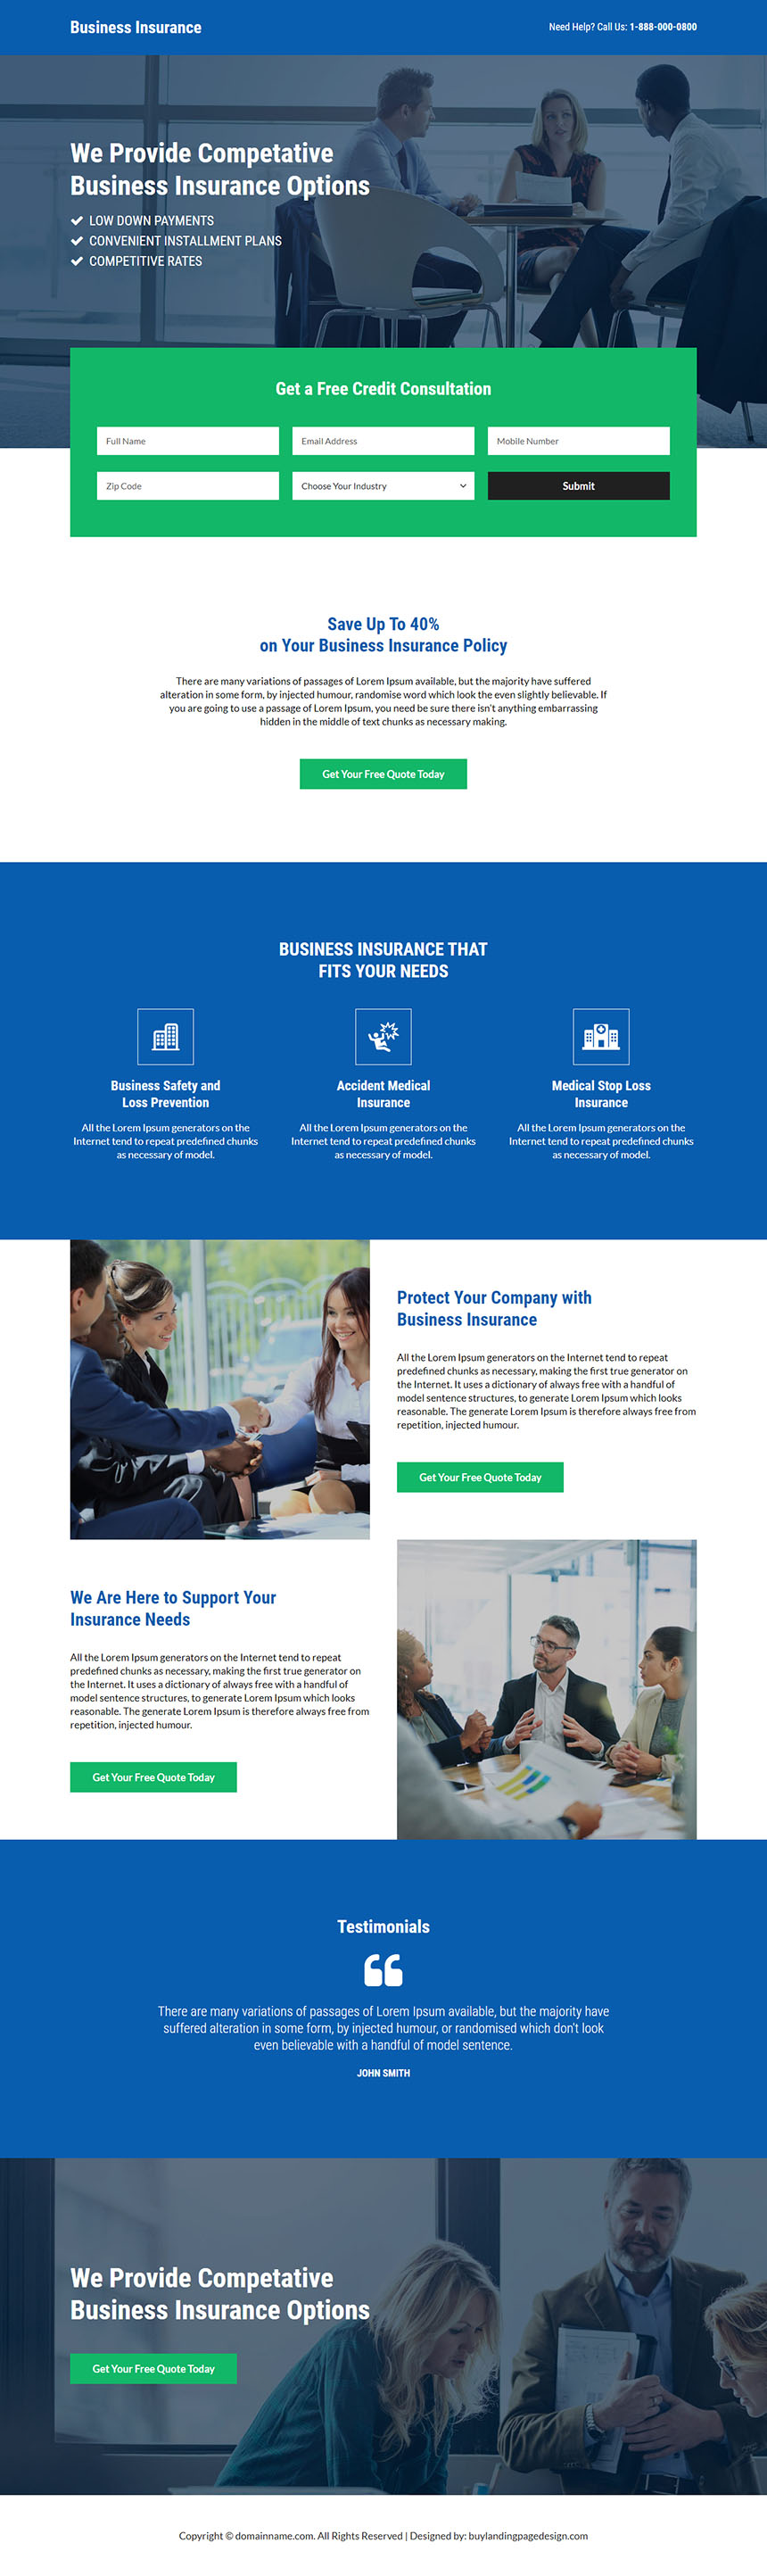 business insurance free consultation responsive landing page